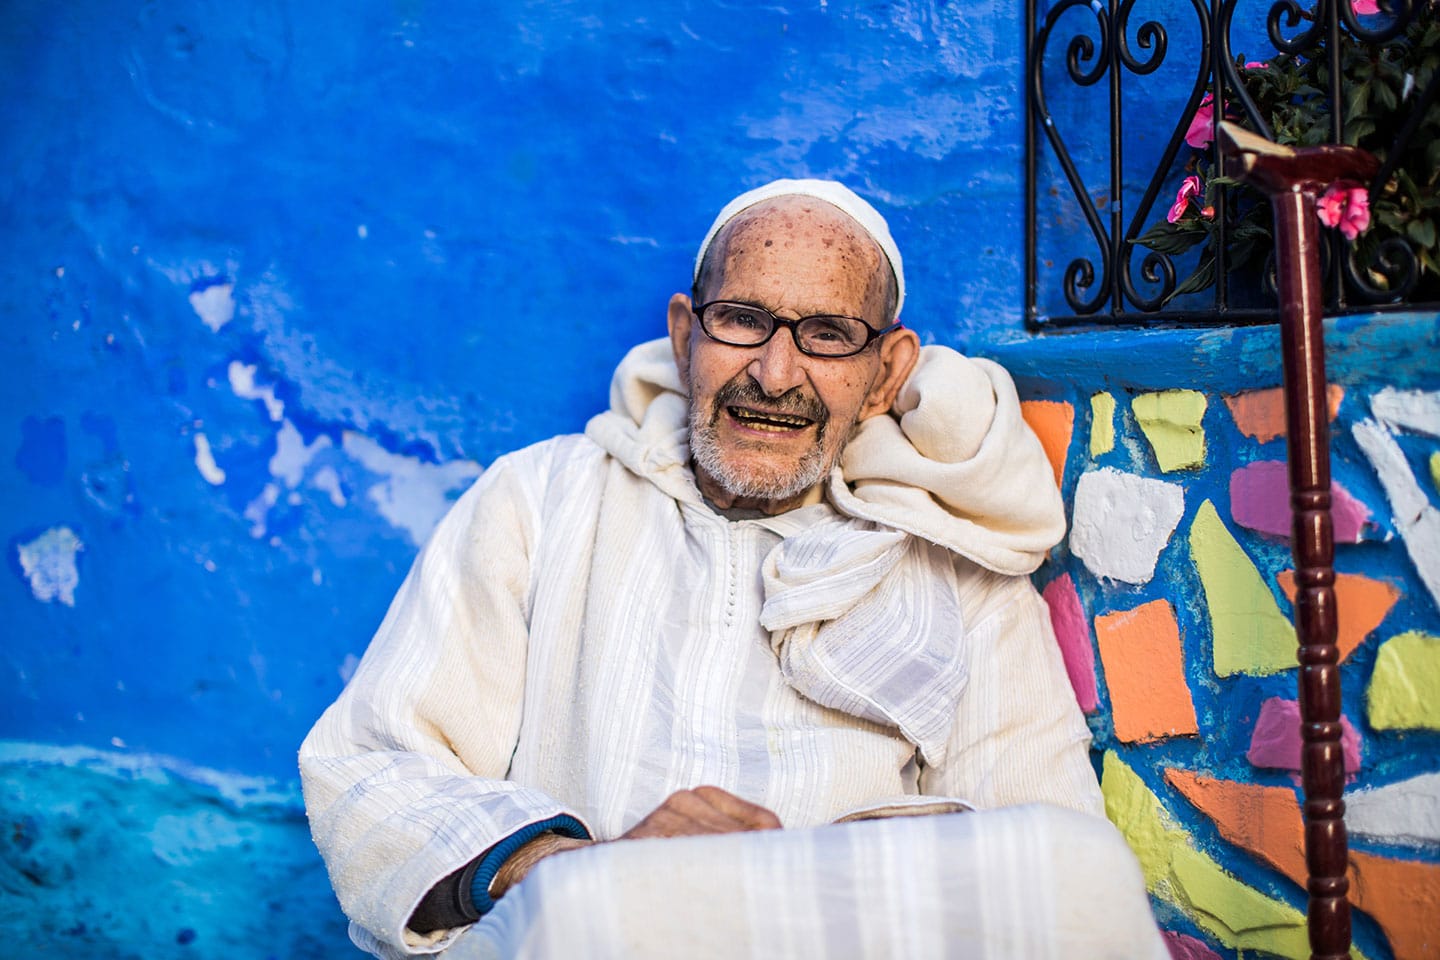 Old man in the streets of Chefchaouen, the blue village of Morocco